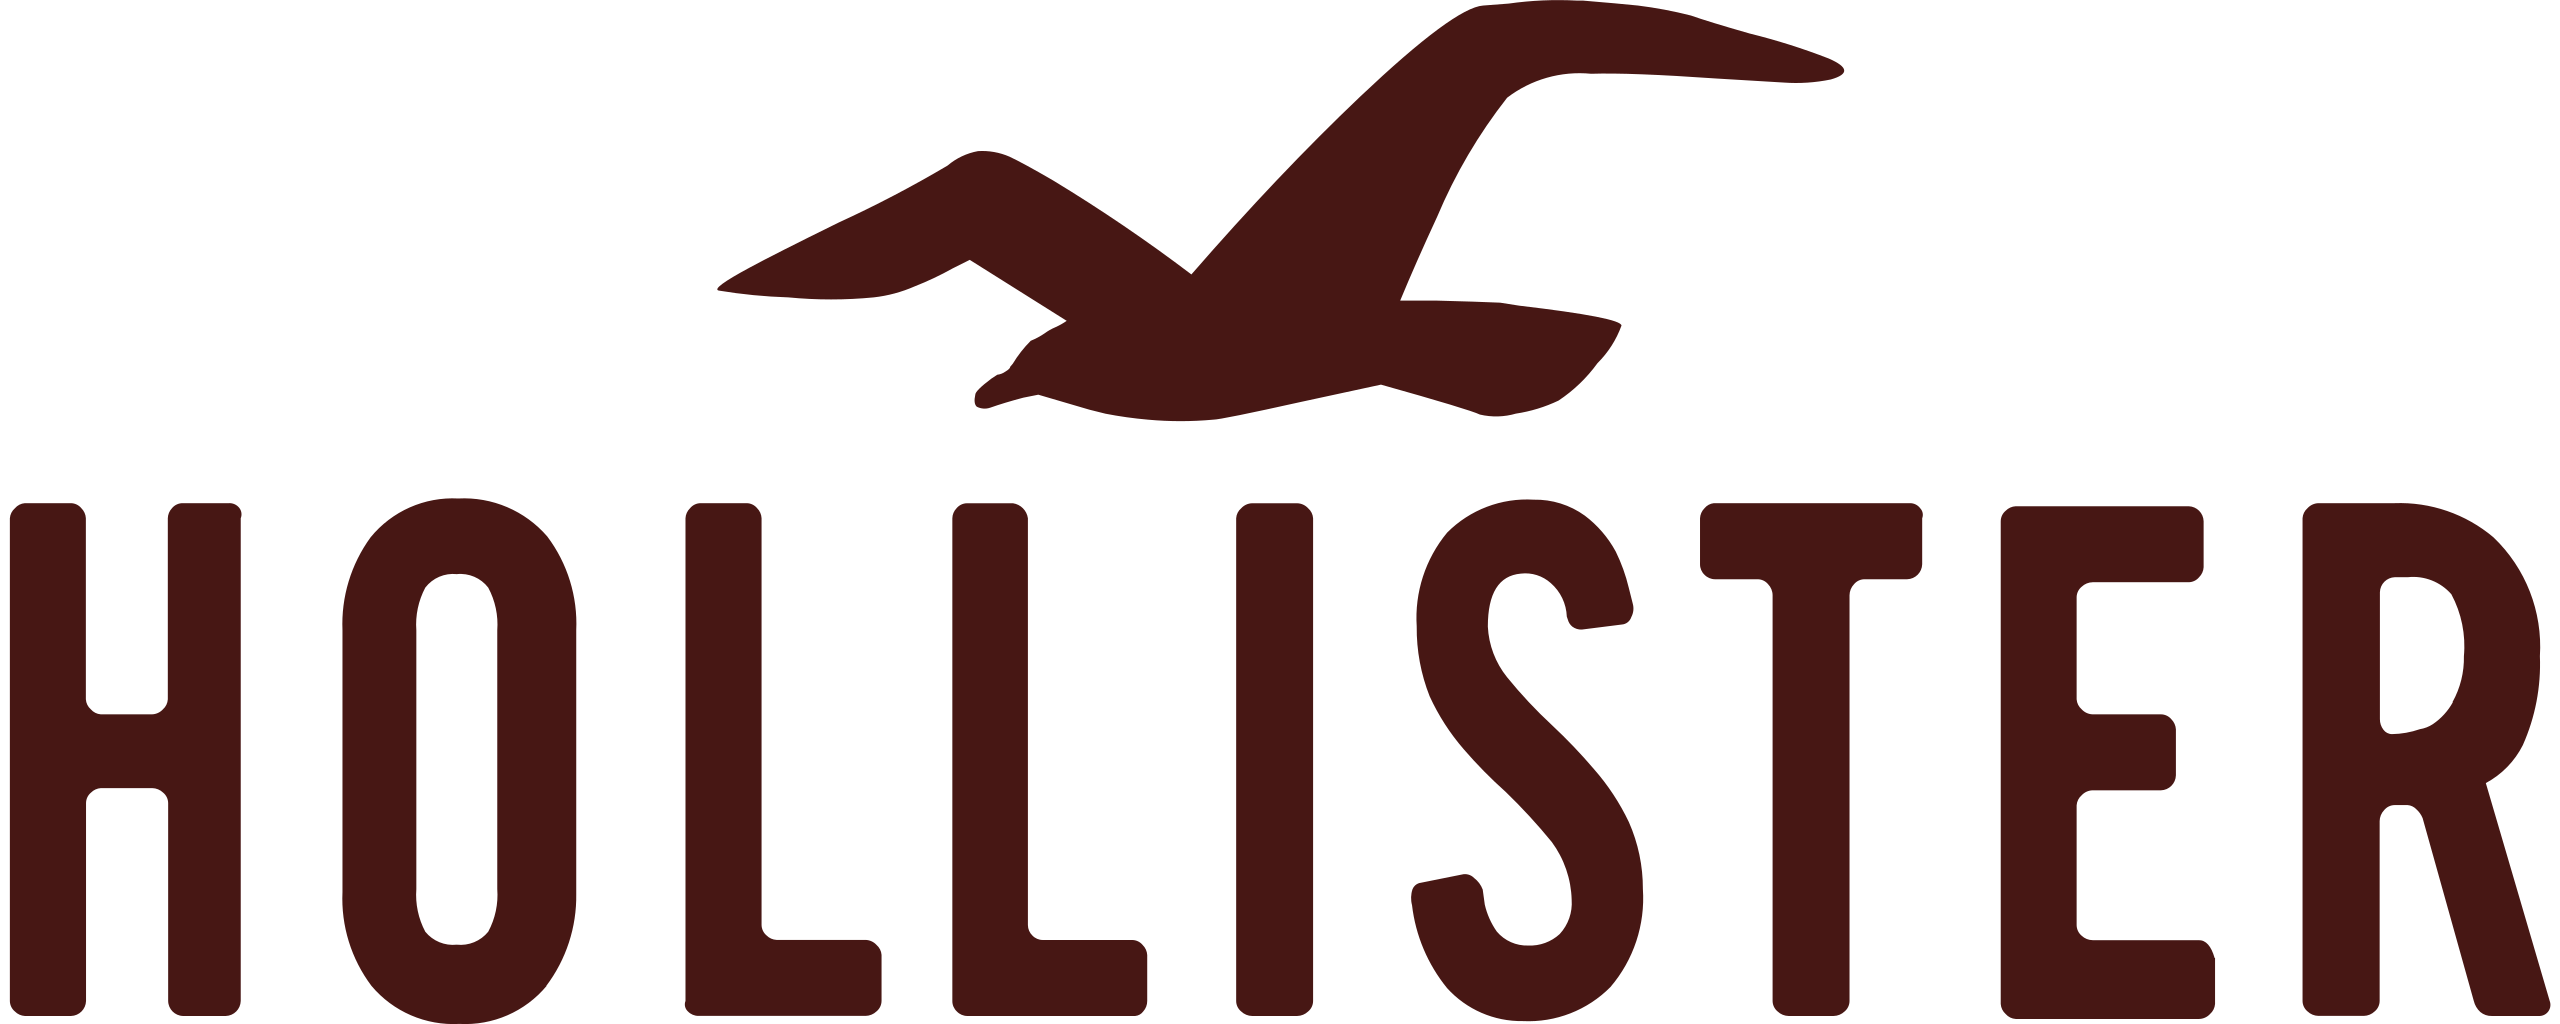 Hollister Coupons & Discounts